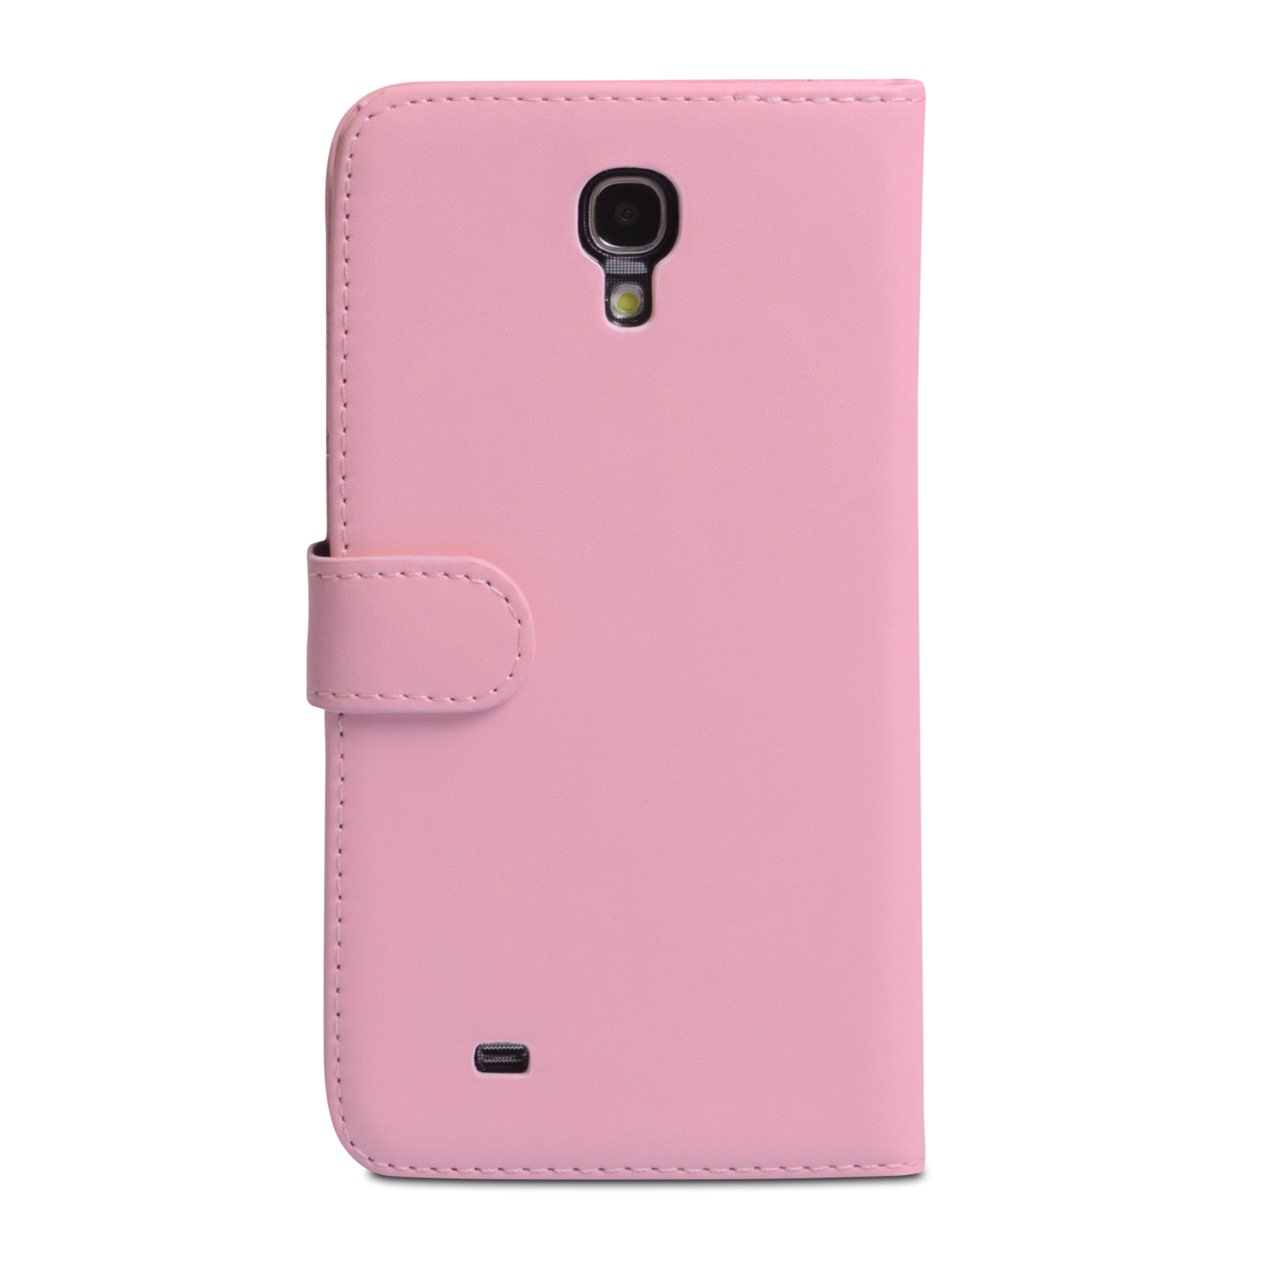 YouSave Samsung Galaxy Mega 6.3 Leather Effect Wallet Case - Baby Pink